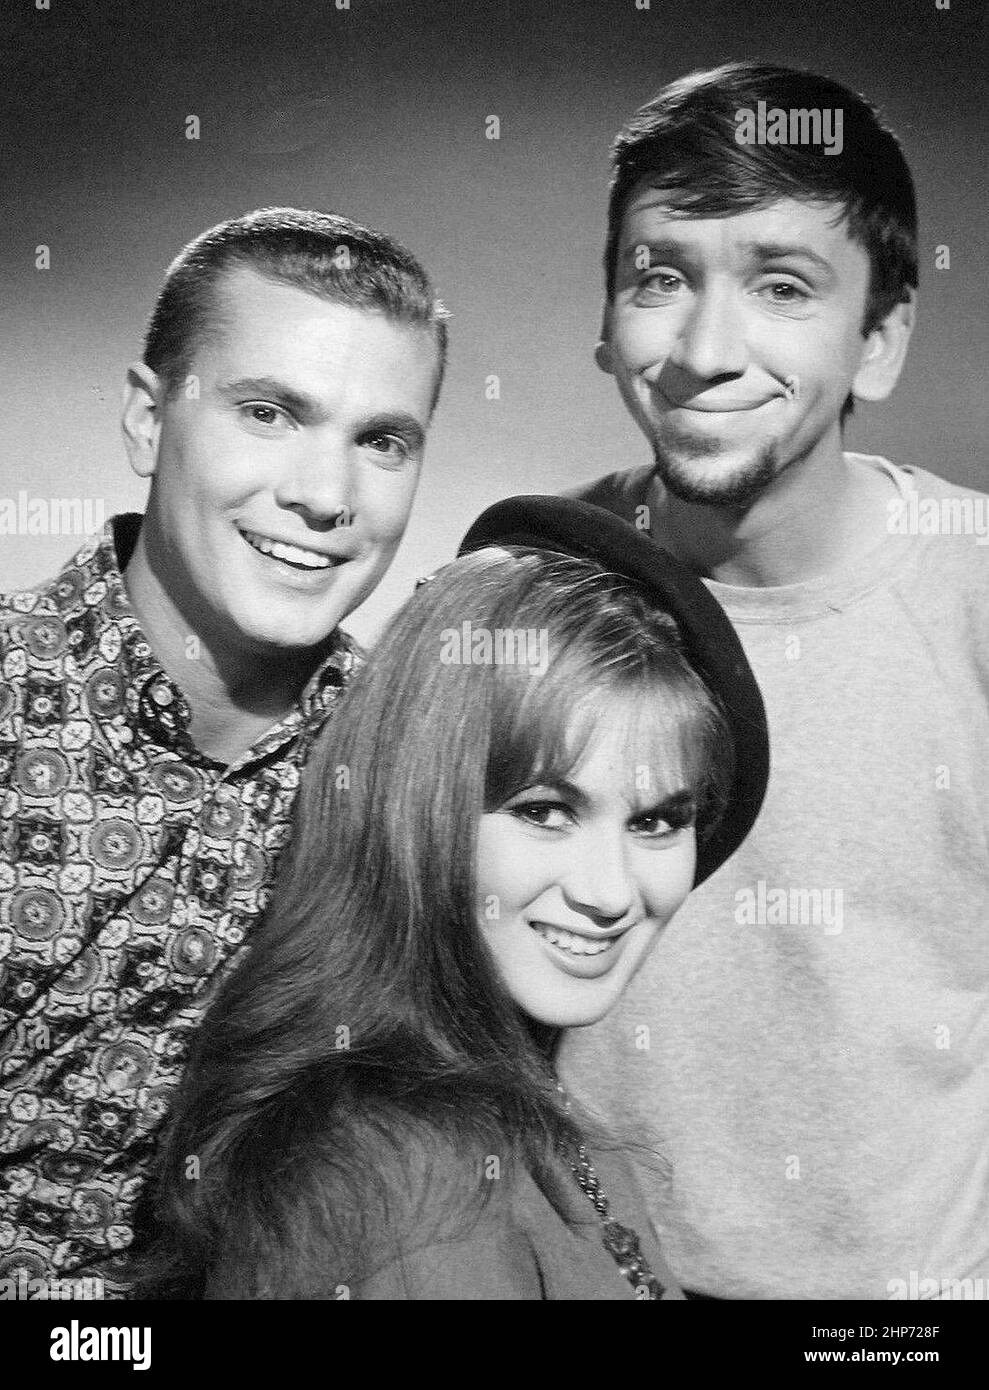 Publicity photo of Dwayne Hickman, Bob Denver, and Danielle De Metz from the television show The Many Loves of Dobie Gillis Stock Photo